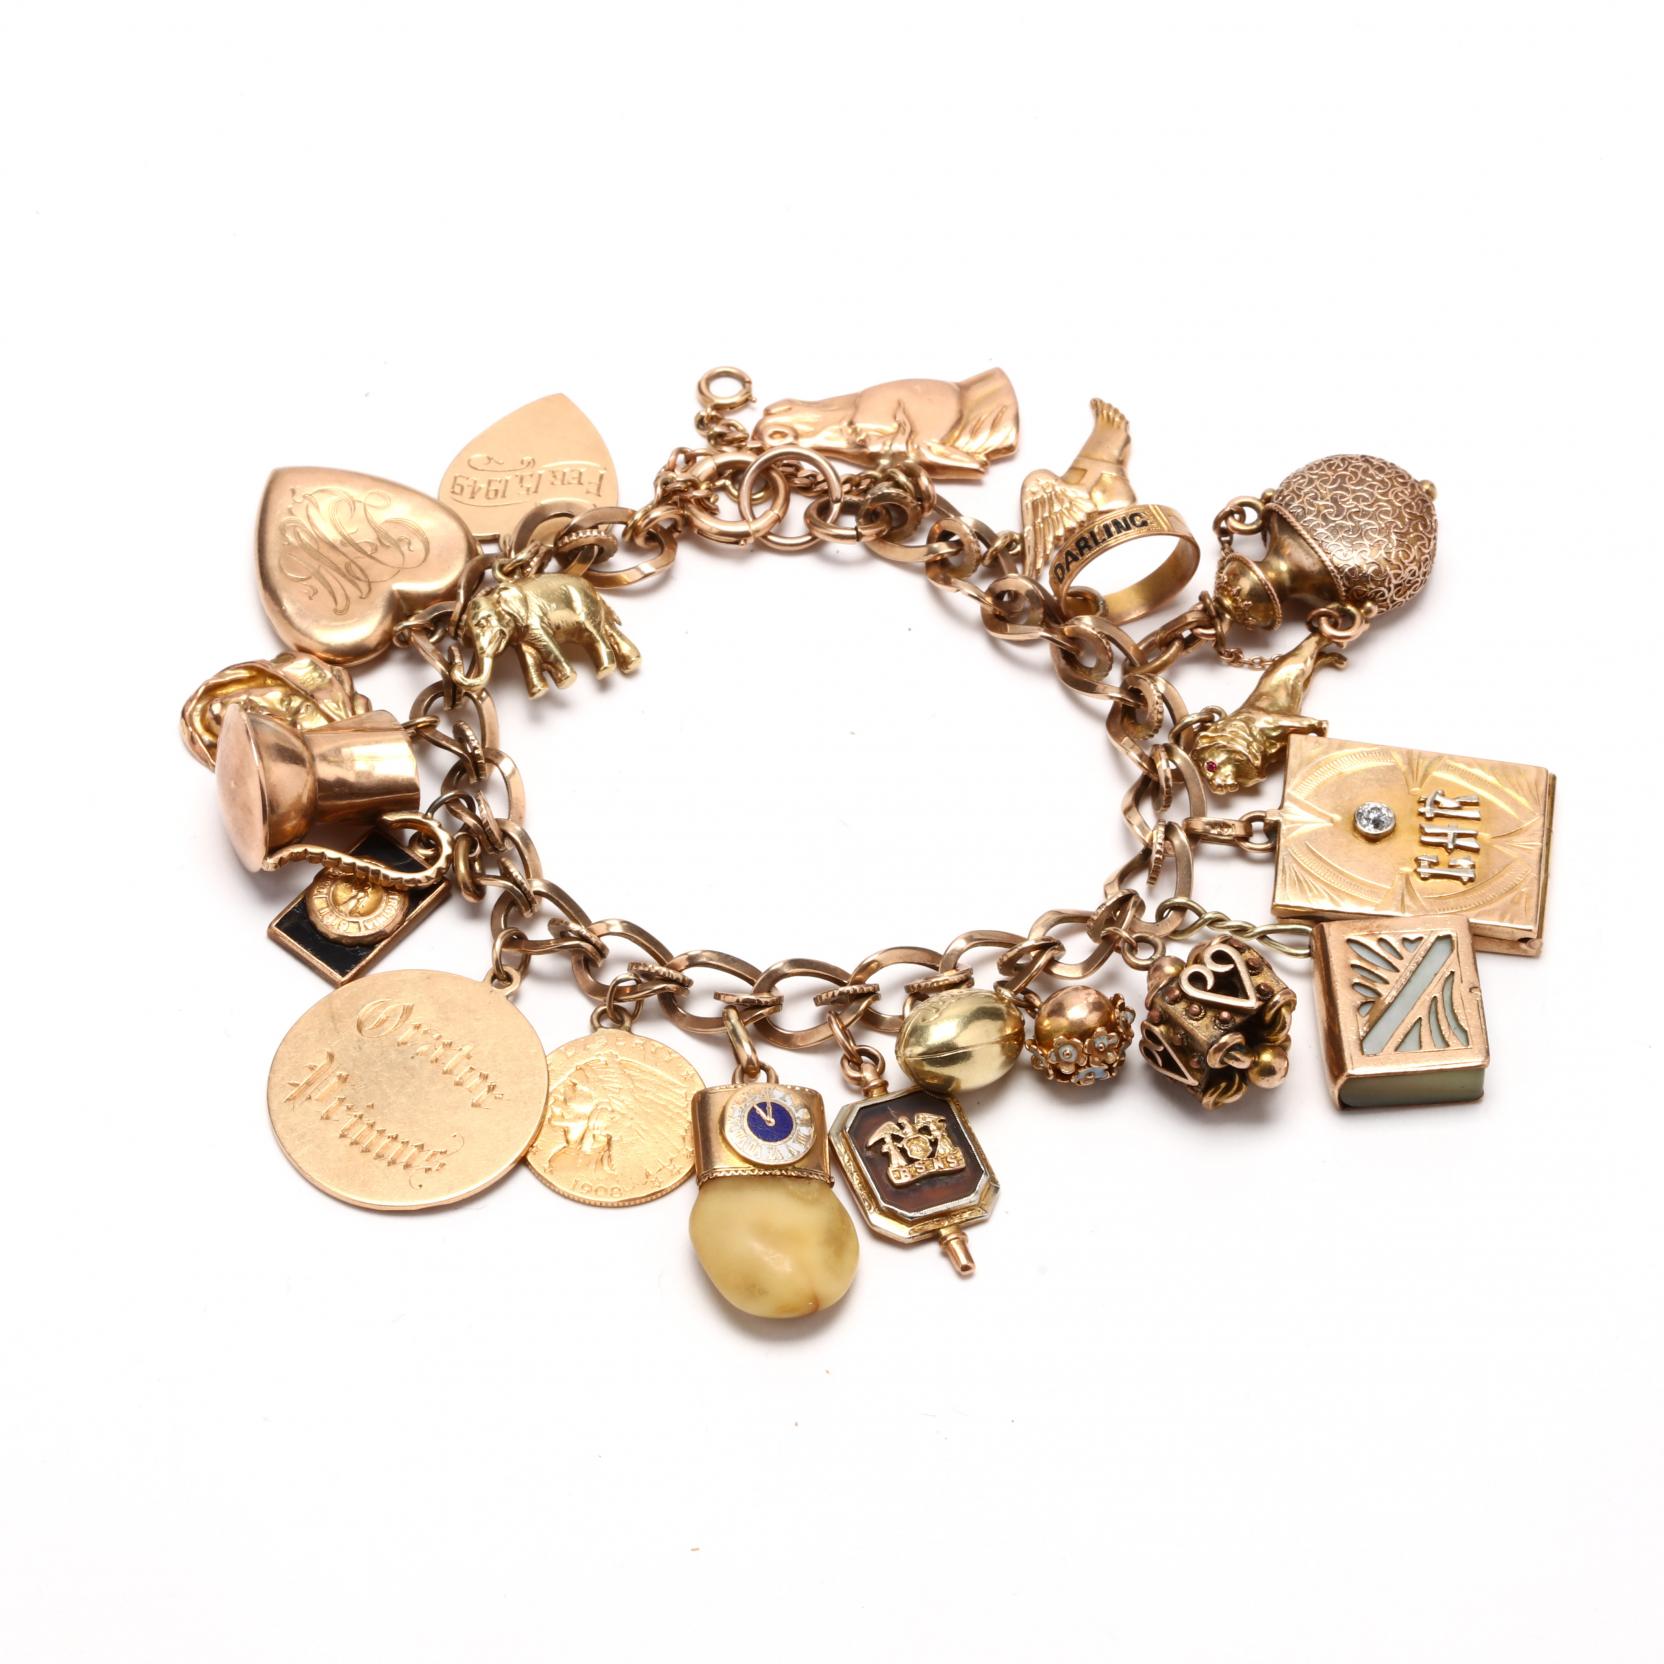 Lot: 1219: Tiffany gold charm bracelet,, Lot Number: 1219, Starting Bid:  $600, Auctioneer: Brunk Auctions, Auc…